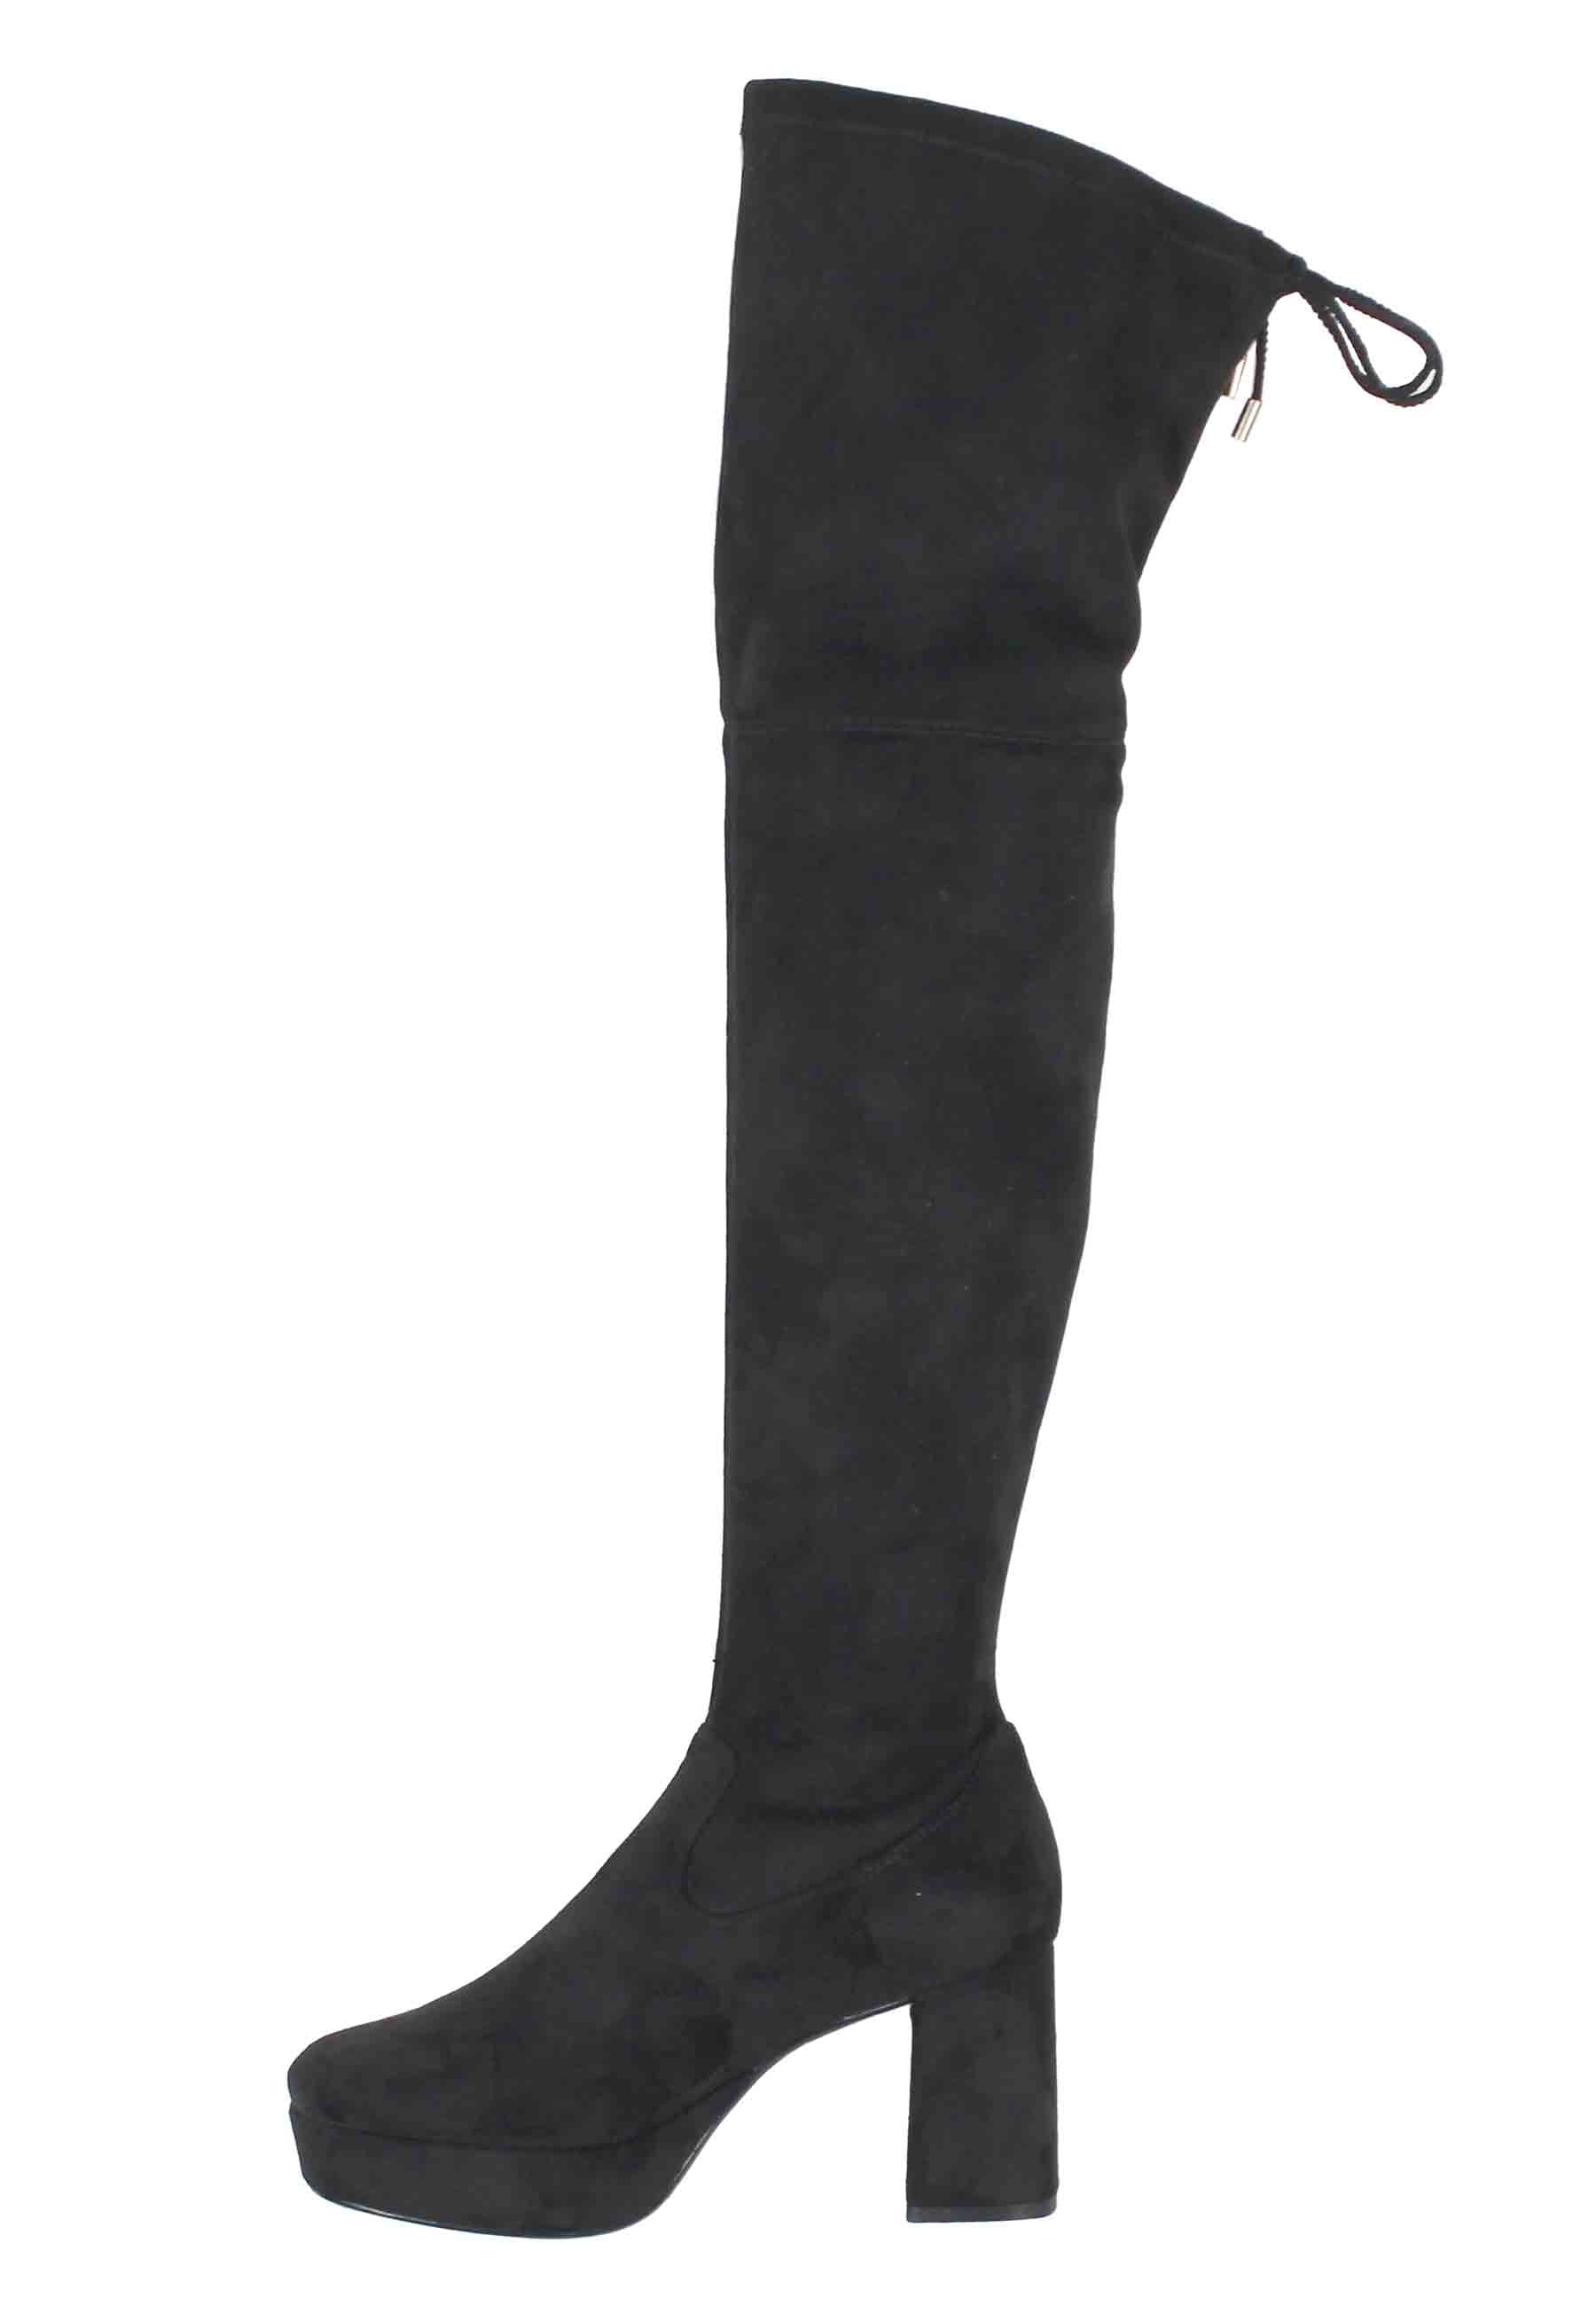 Women's boots in black suede with high shaft